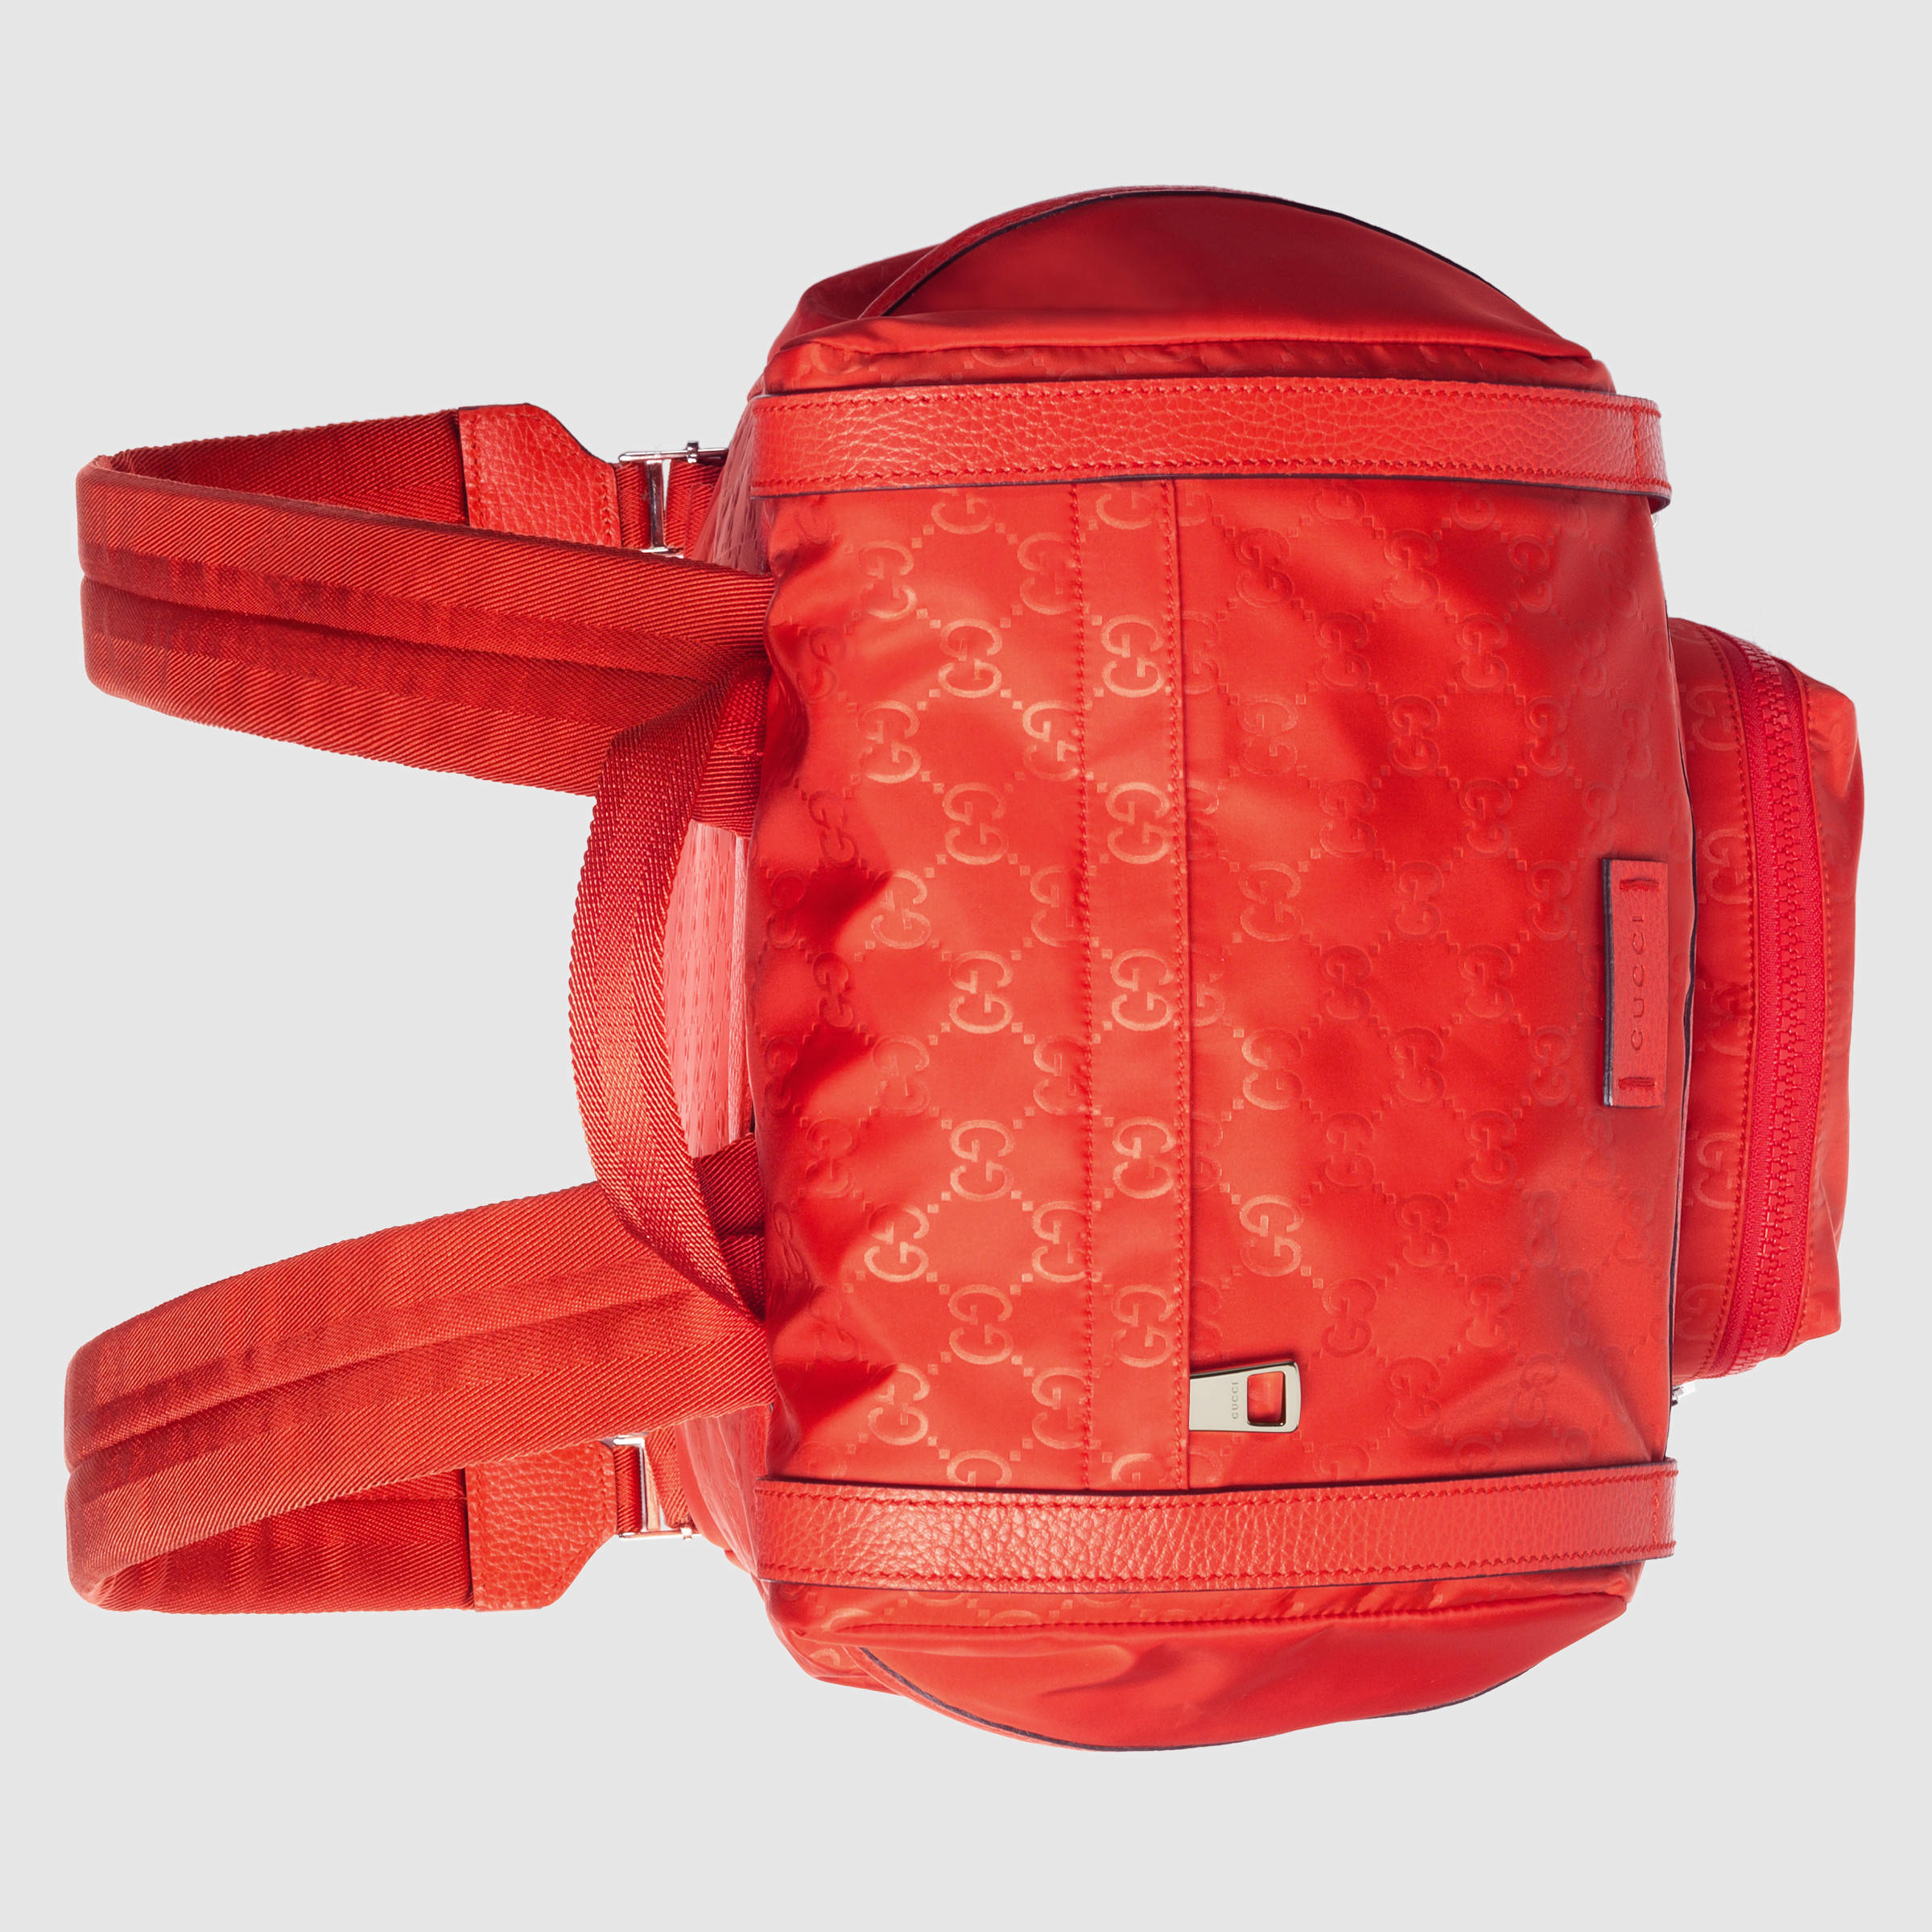 Gucci Nylon Ssima Light Backpack in Red for Men - Lyst